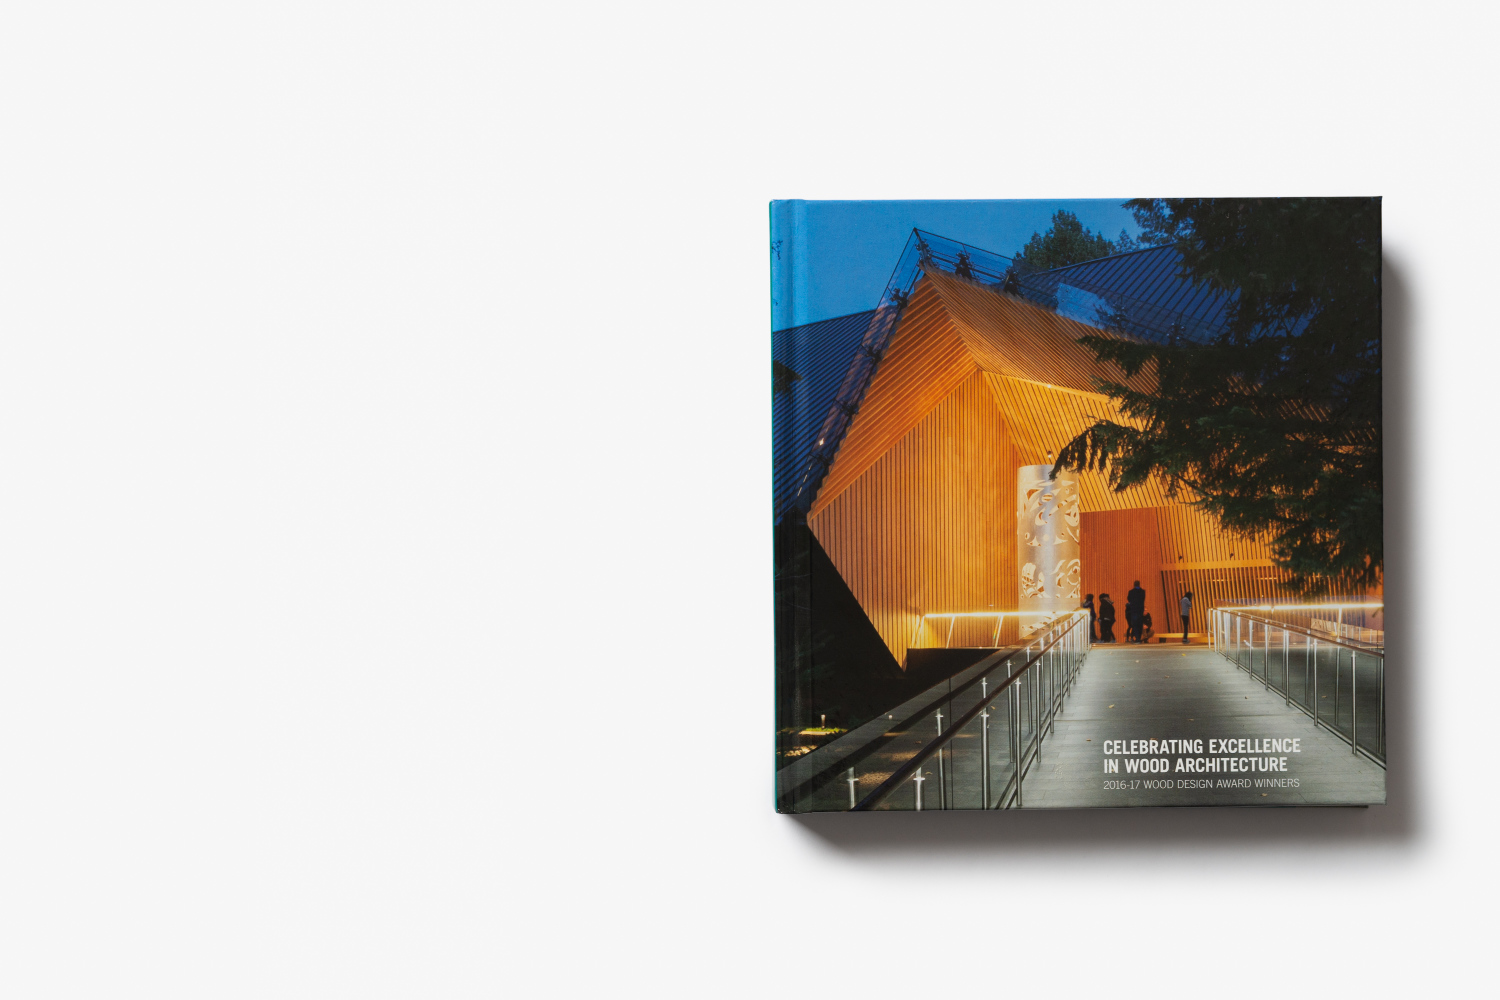 Birdseye Featured in “Celebrating Excellence in Wood Architecture”